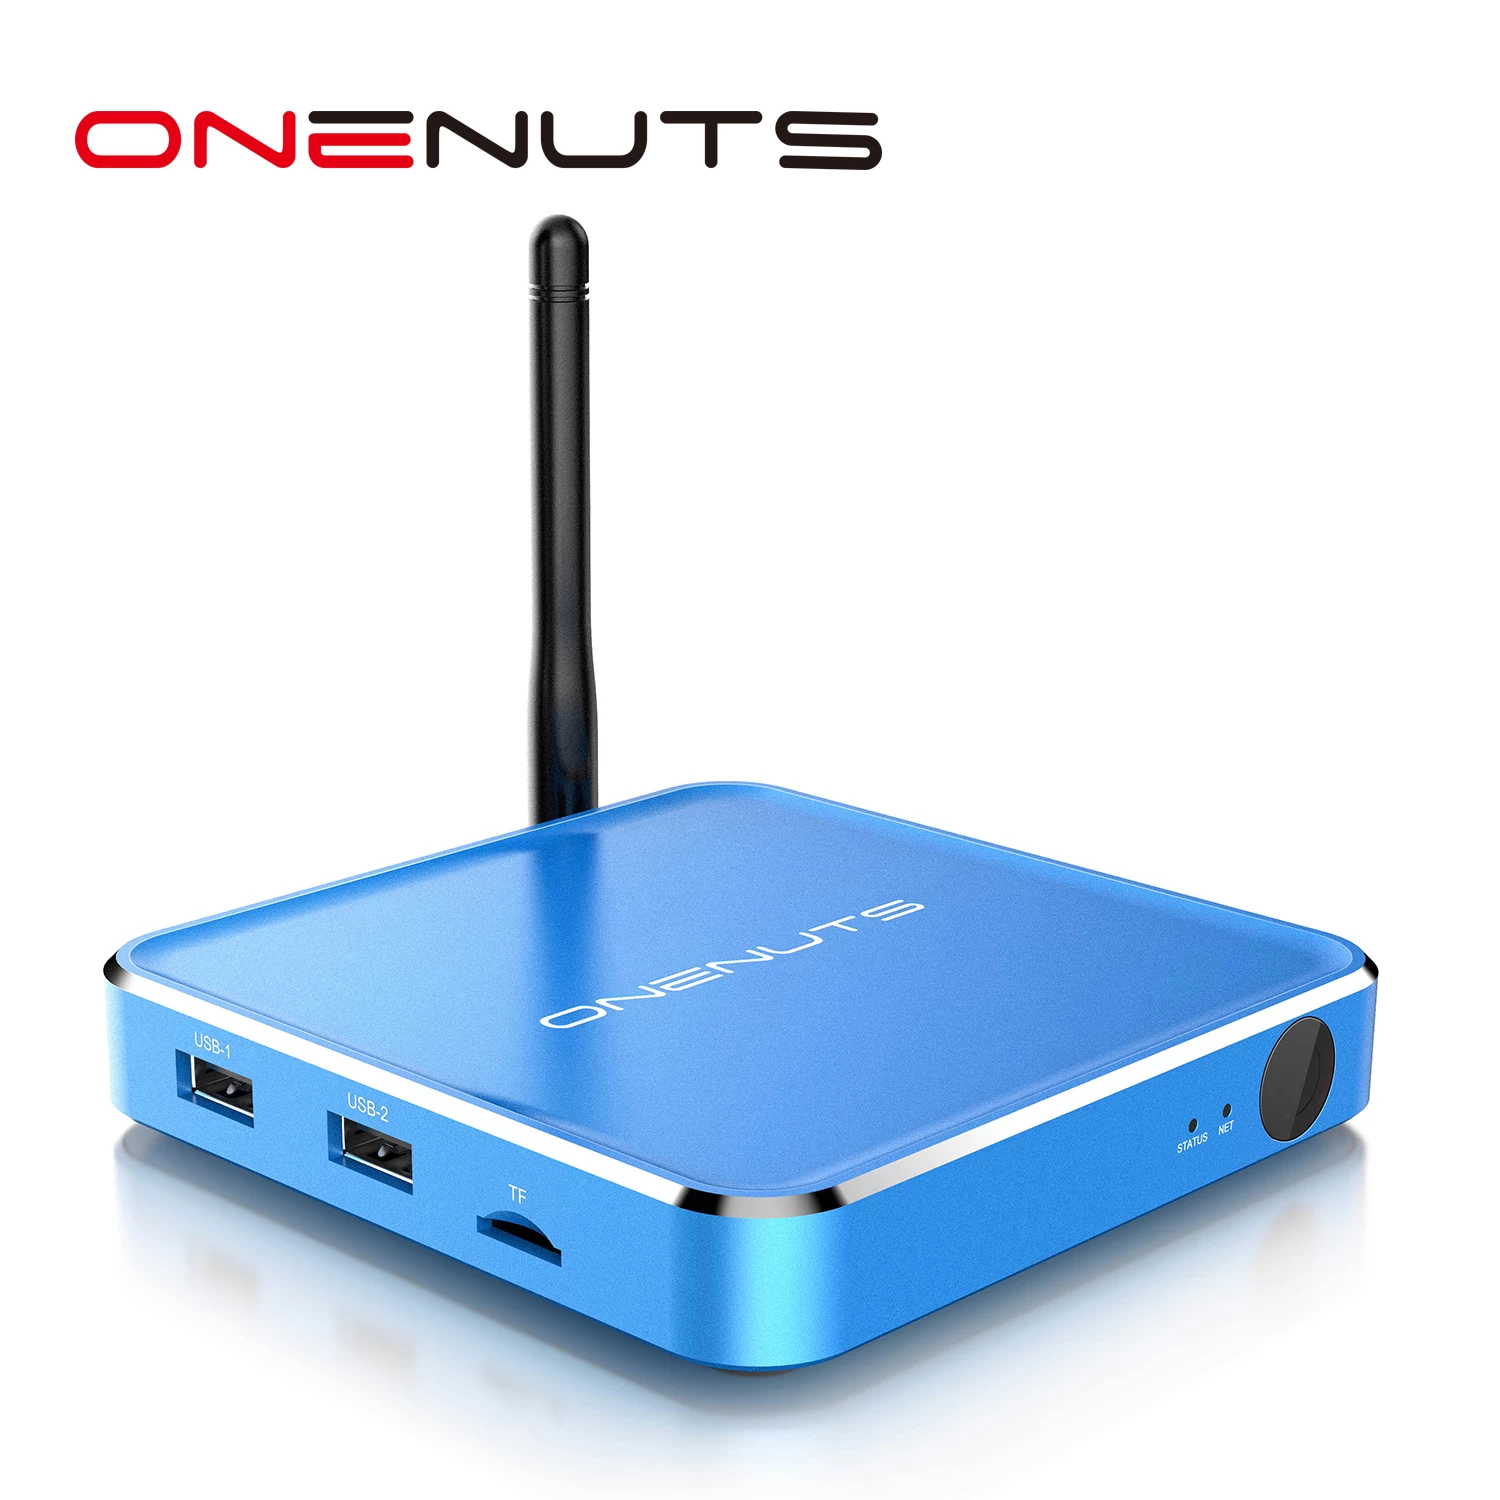 Realtek RTD1295 Android TV Box, 4 k Android TV Box fabricant Chine